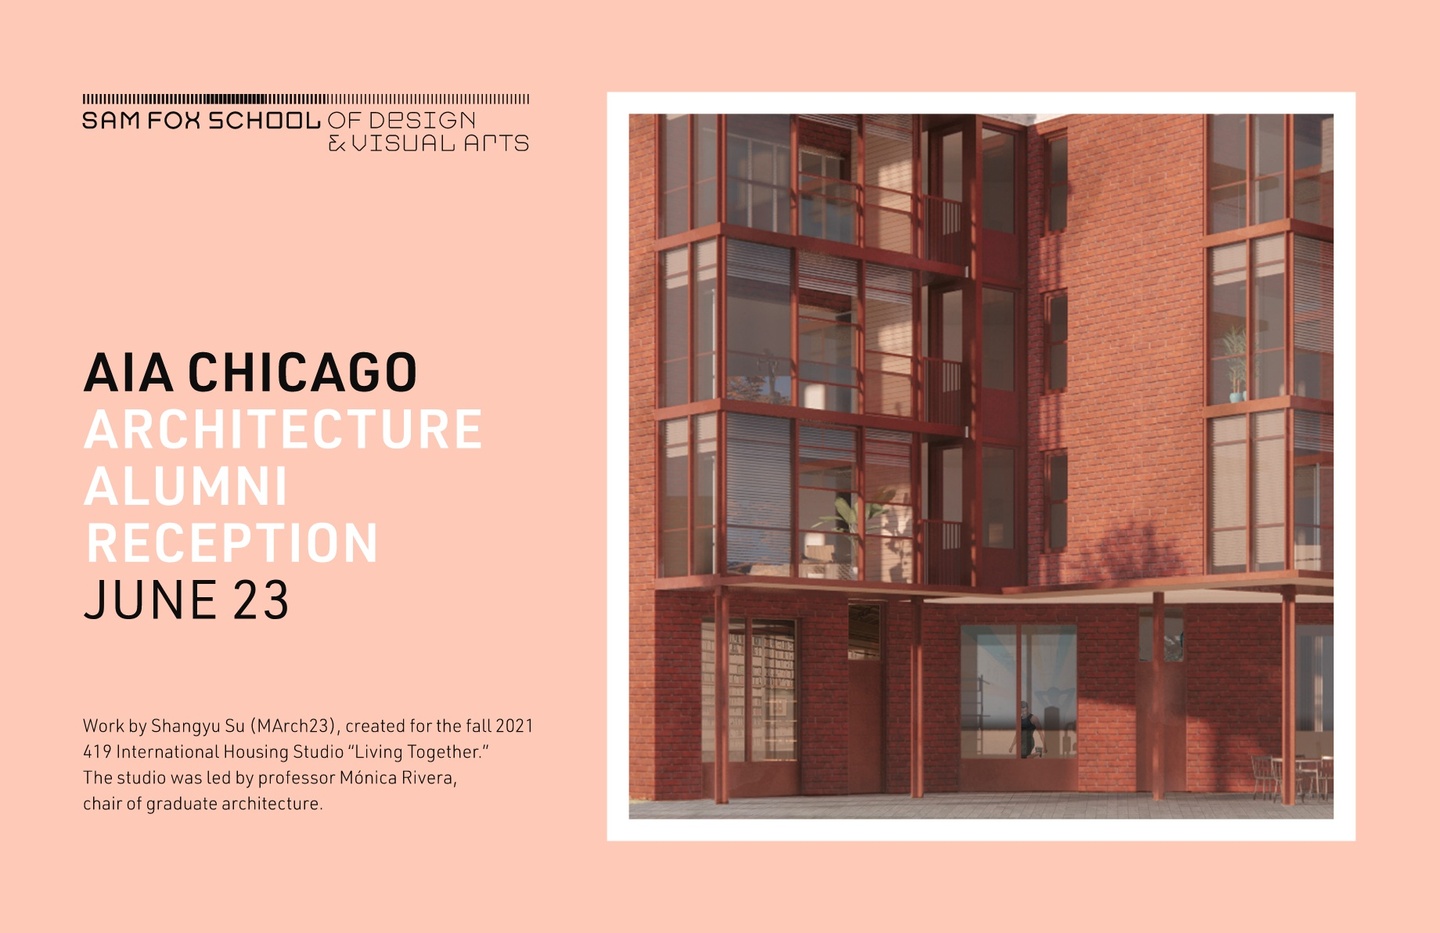 A painterly rendering of a four-story, brick apartment building bathed in late afternoon light. The rendering is framed with a white border on the right side a pale, peach-colored field. At left, text reads AIA Chicago, Architecture Alumni Reception, June 23. Image caption: Work by Shangyu Su (MArch23), created for the fall 2021 419 International Housing Studio "Living Together." The studio was led by professor Mónica Rivera, chair of graduate architecture.